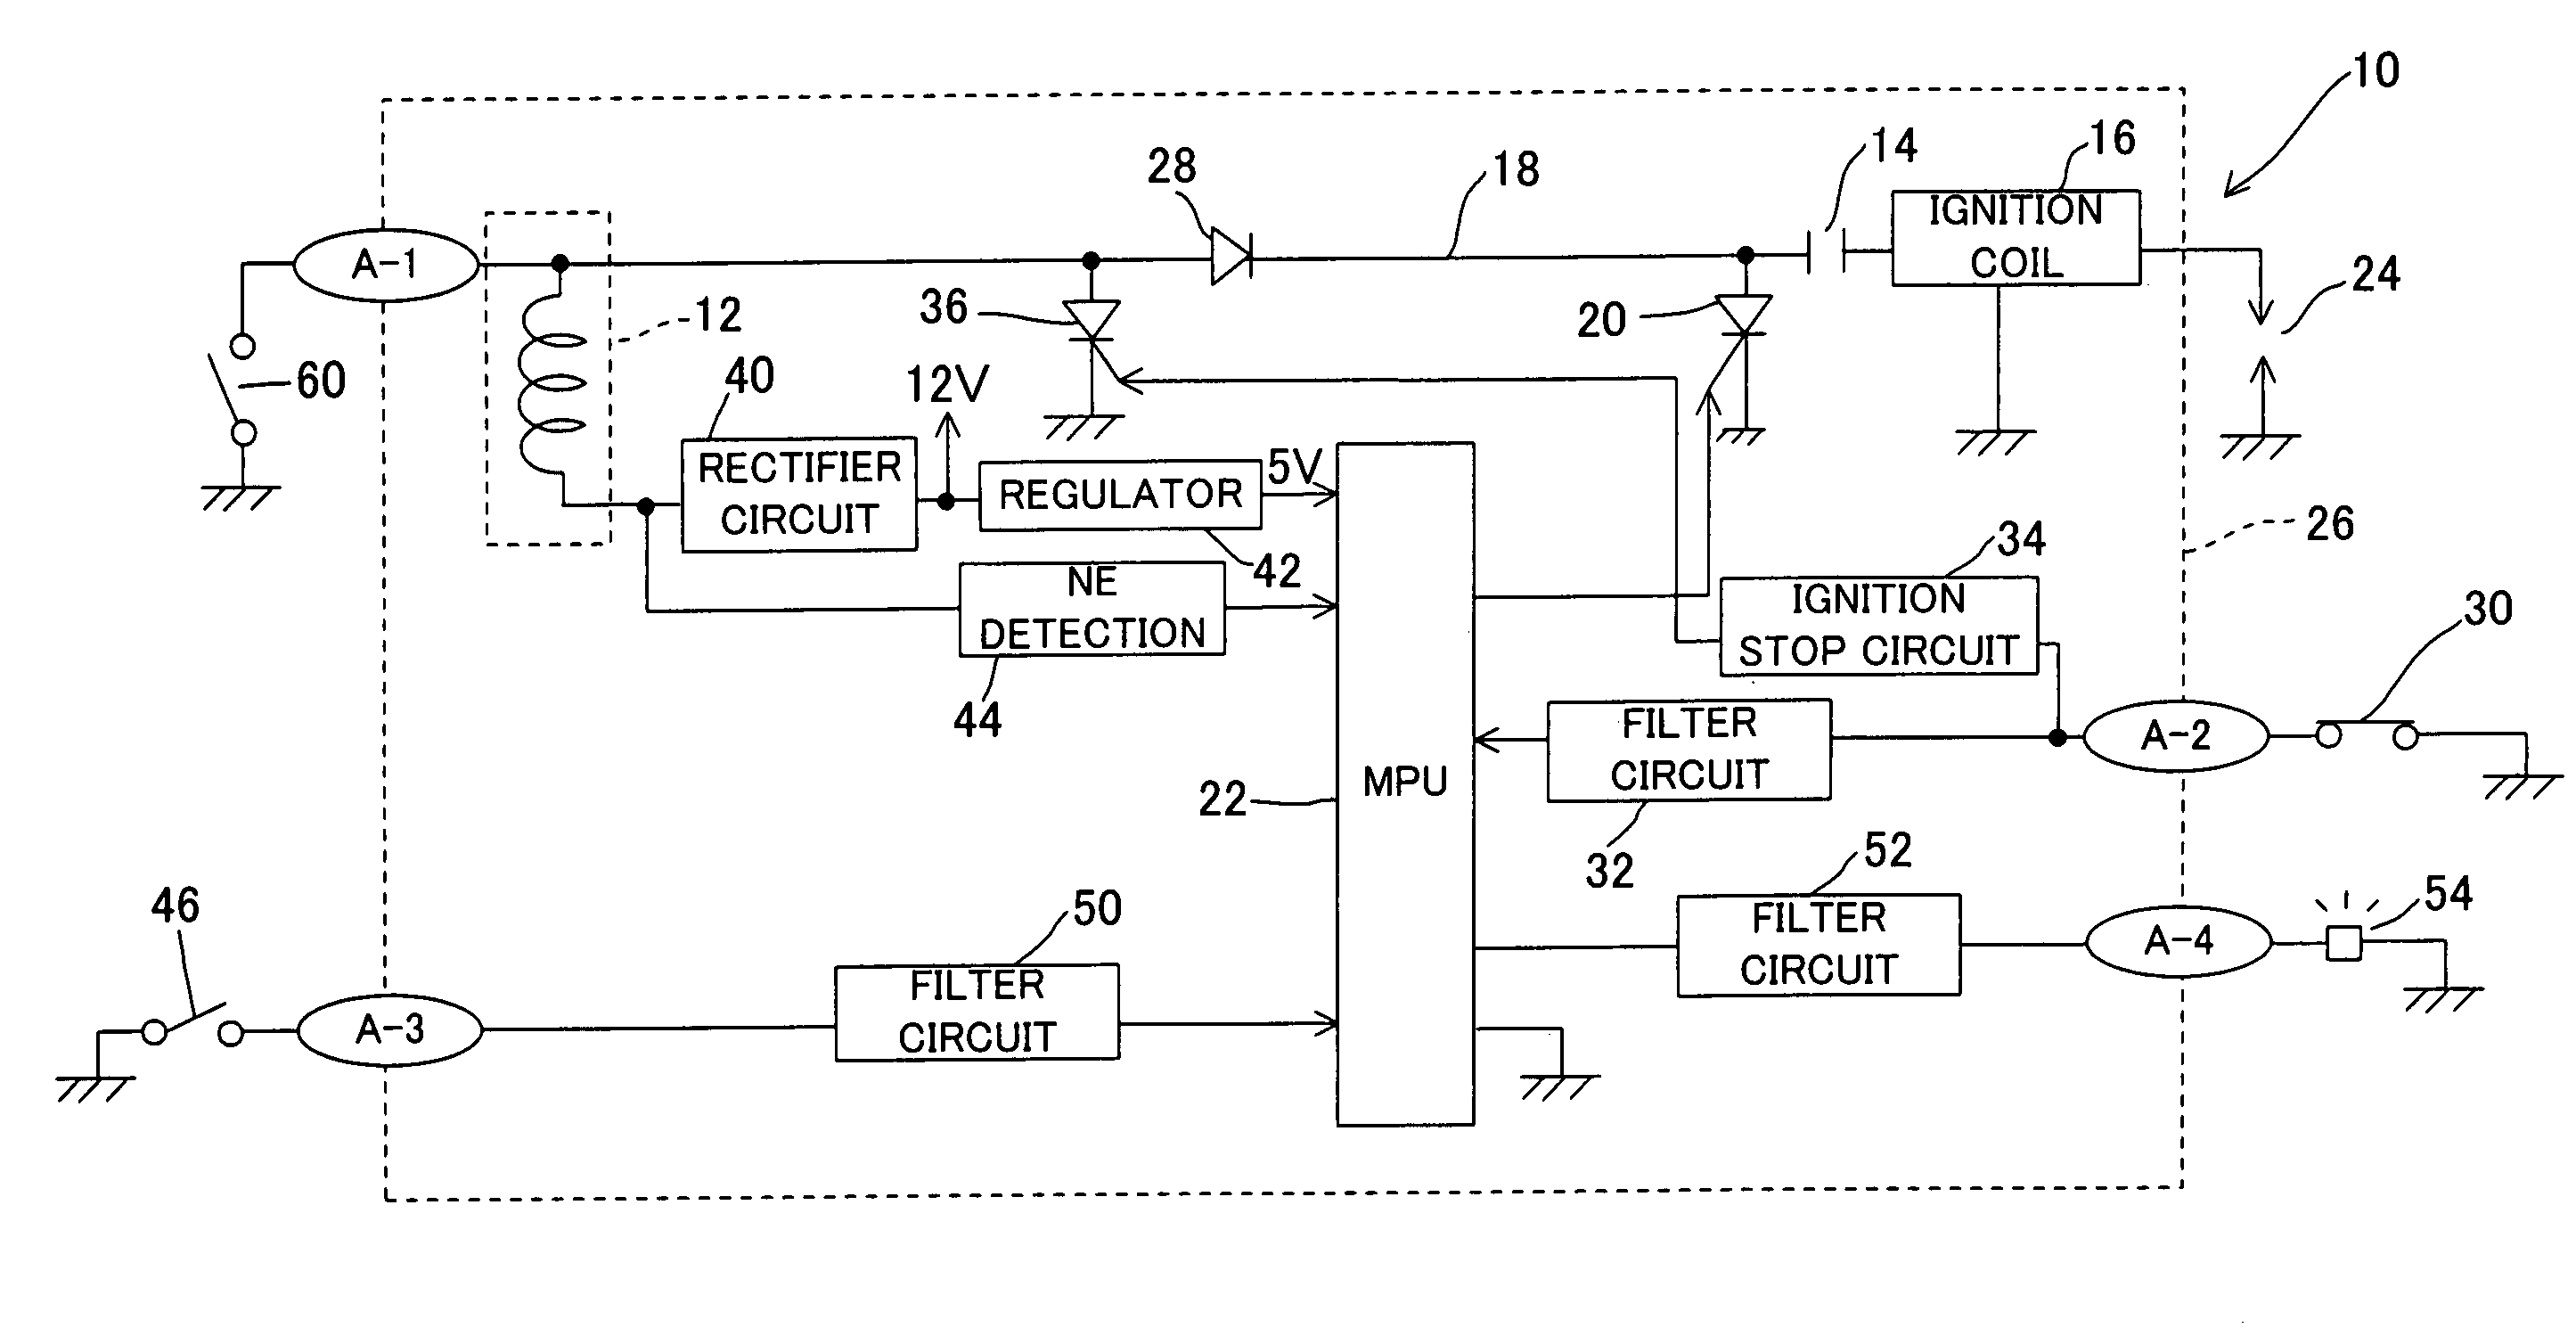 Capacitor-discharge ignition system for internal combustion engine